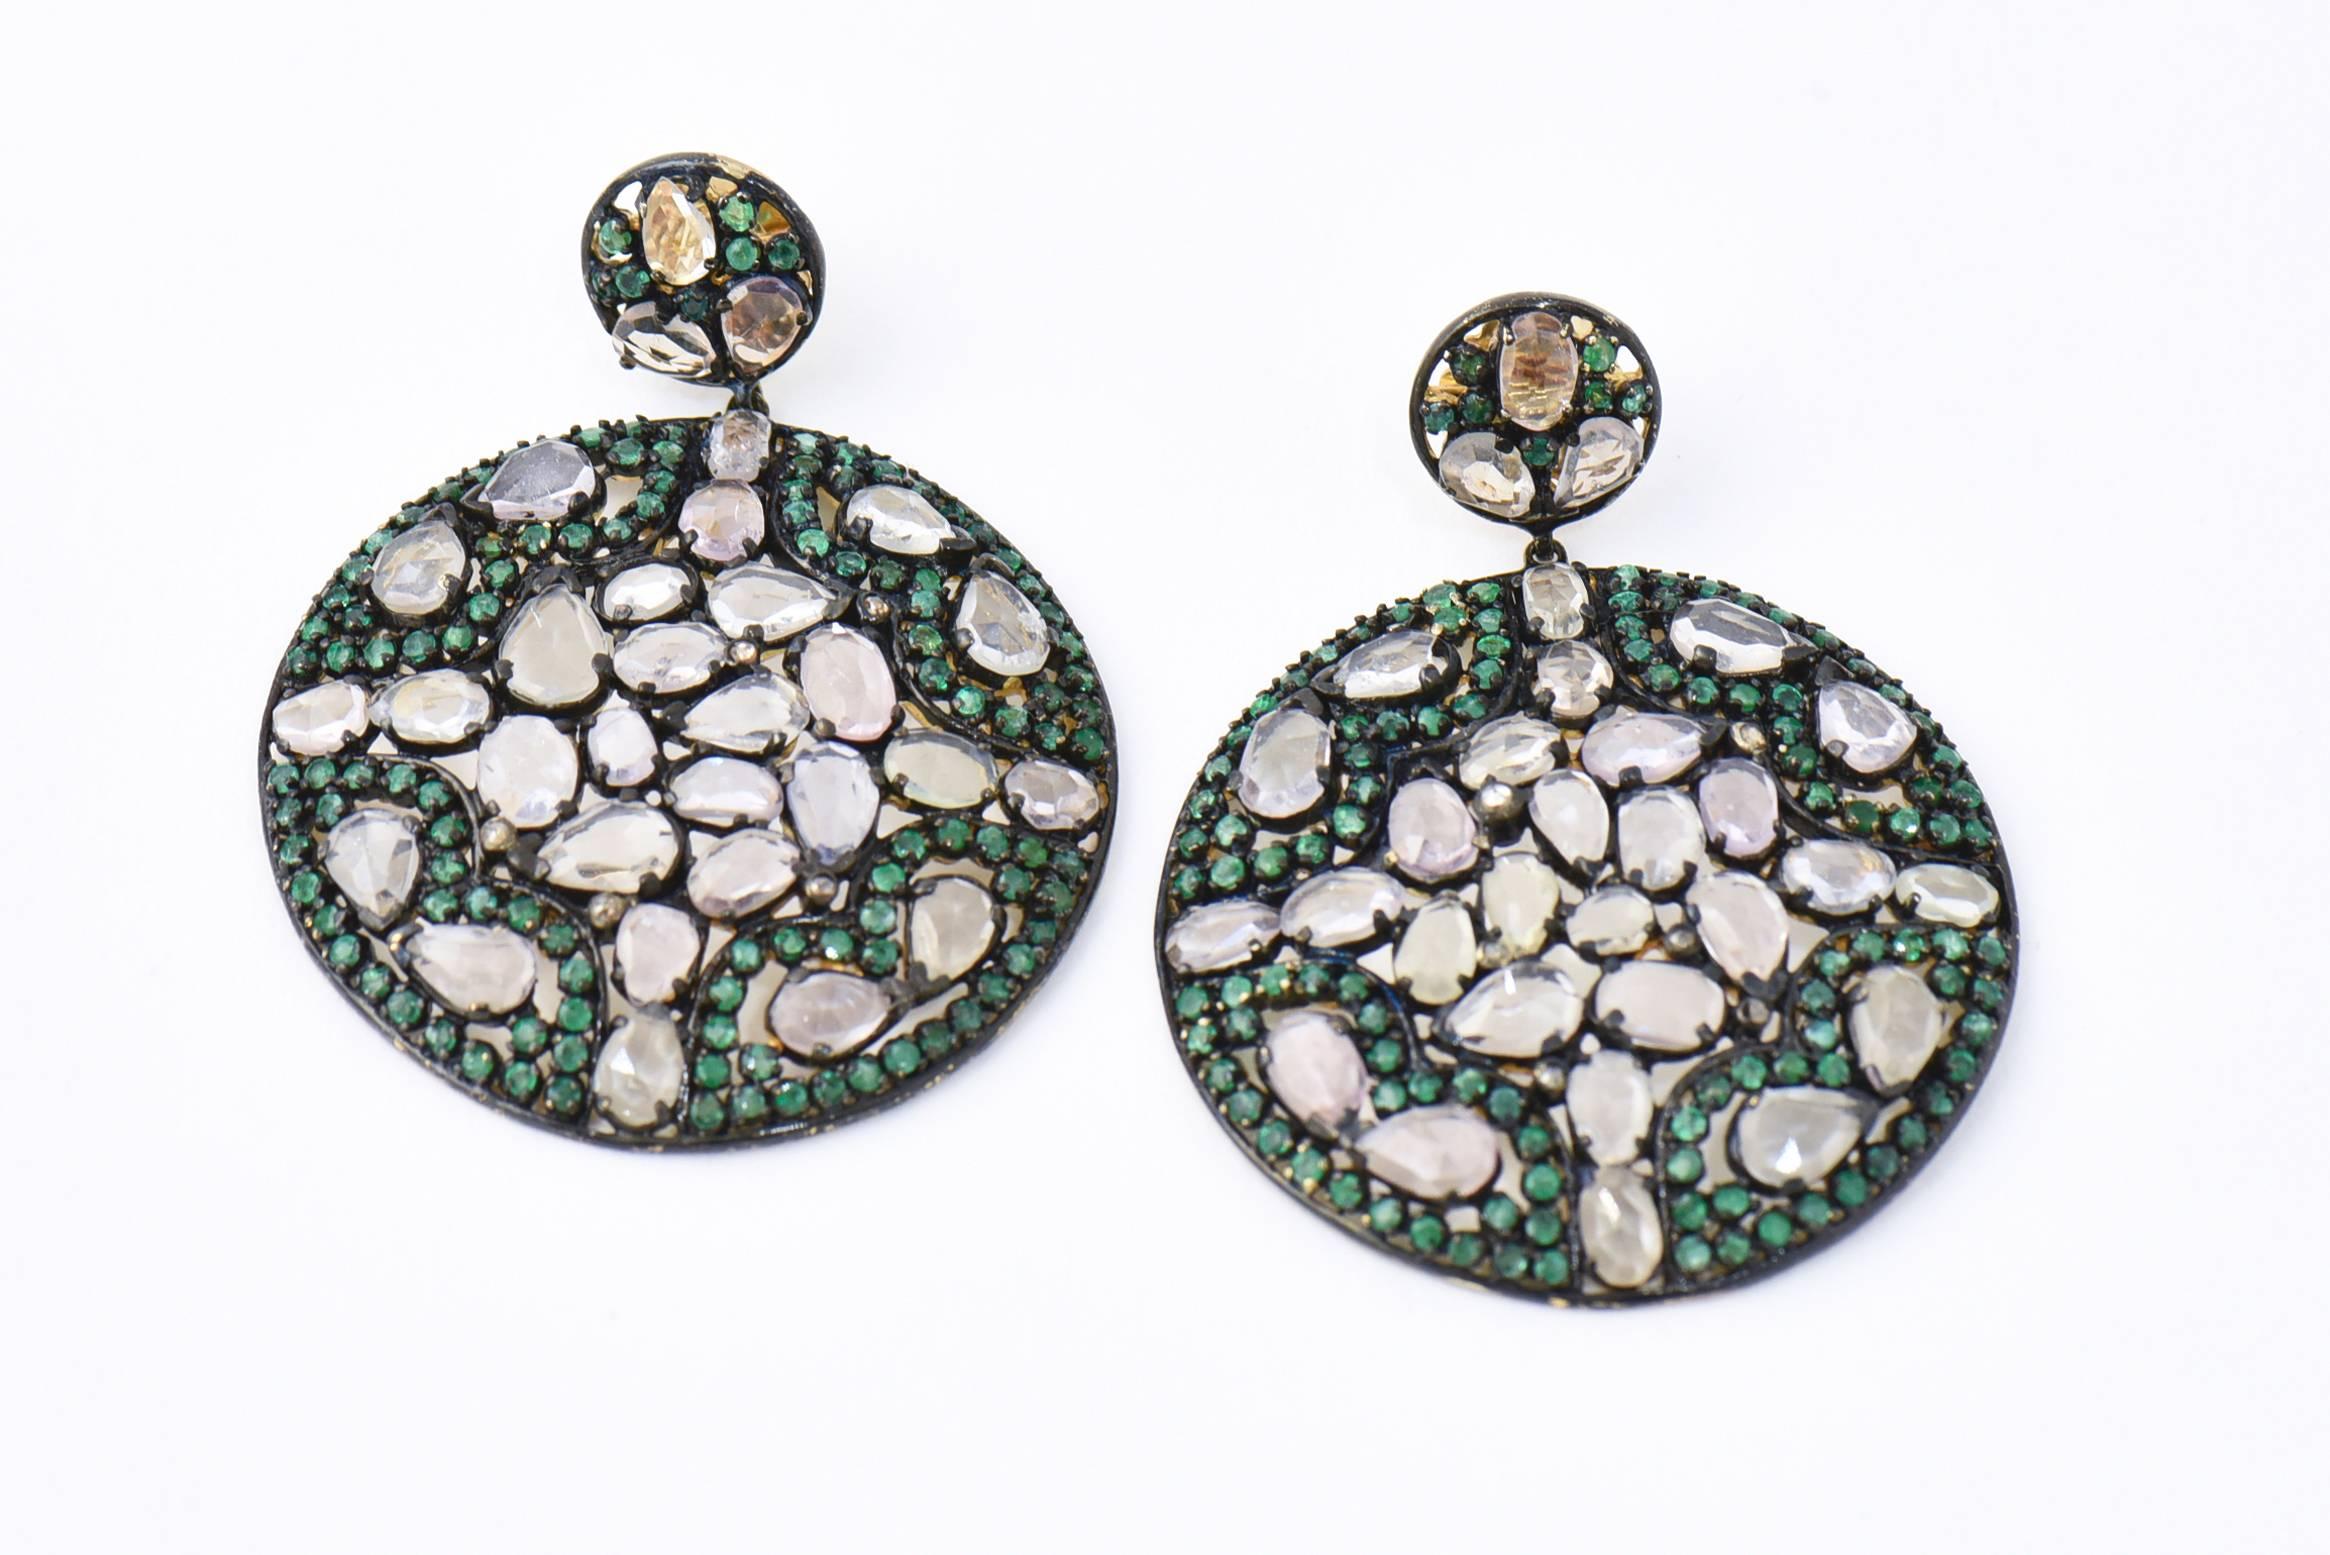 Lovely long dangling earrings that resemble a stained glass window. An tsavorite garnet and white topaz design is set through the ear with an 18k yellow gold post. The large round drop features translucent tsavorite and white topaz with diamond